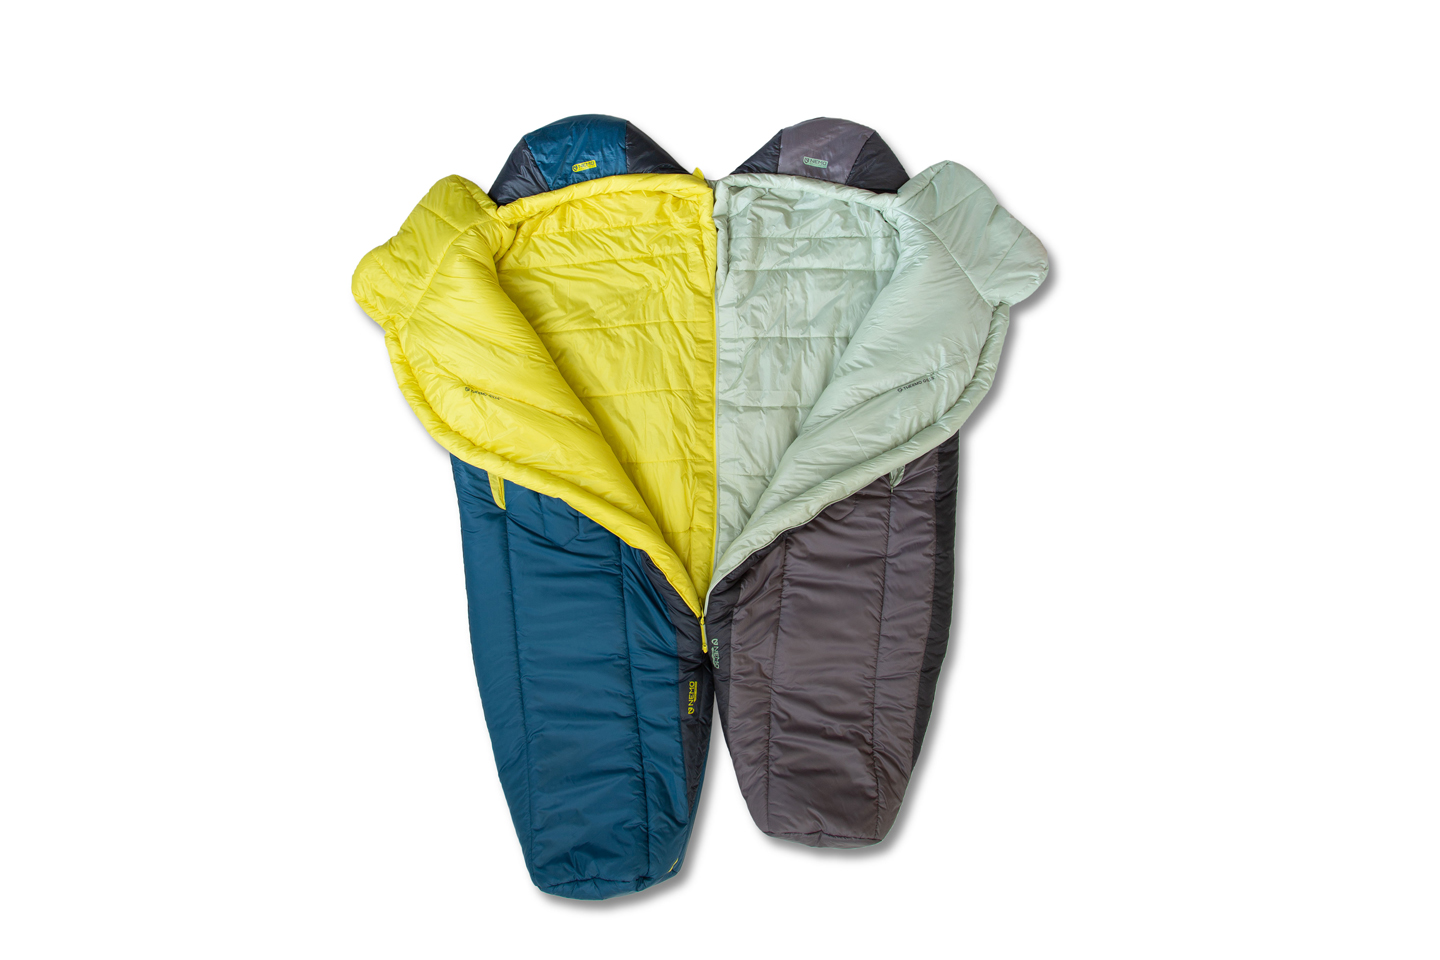 NEMO's New Recycled Forte Endless Promise Sleeping Bag